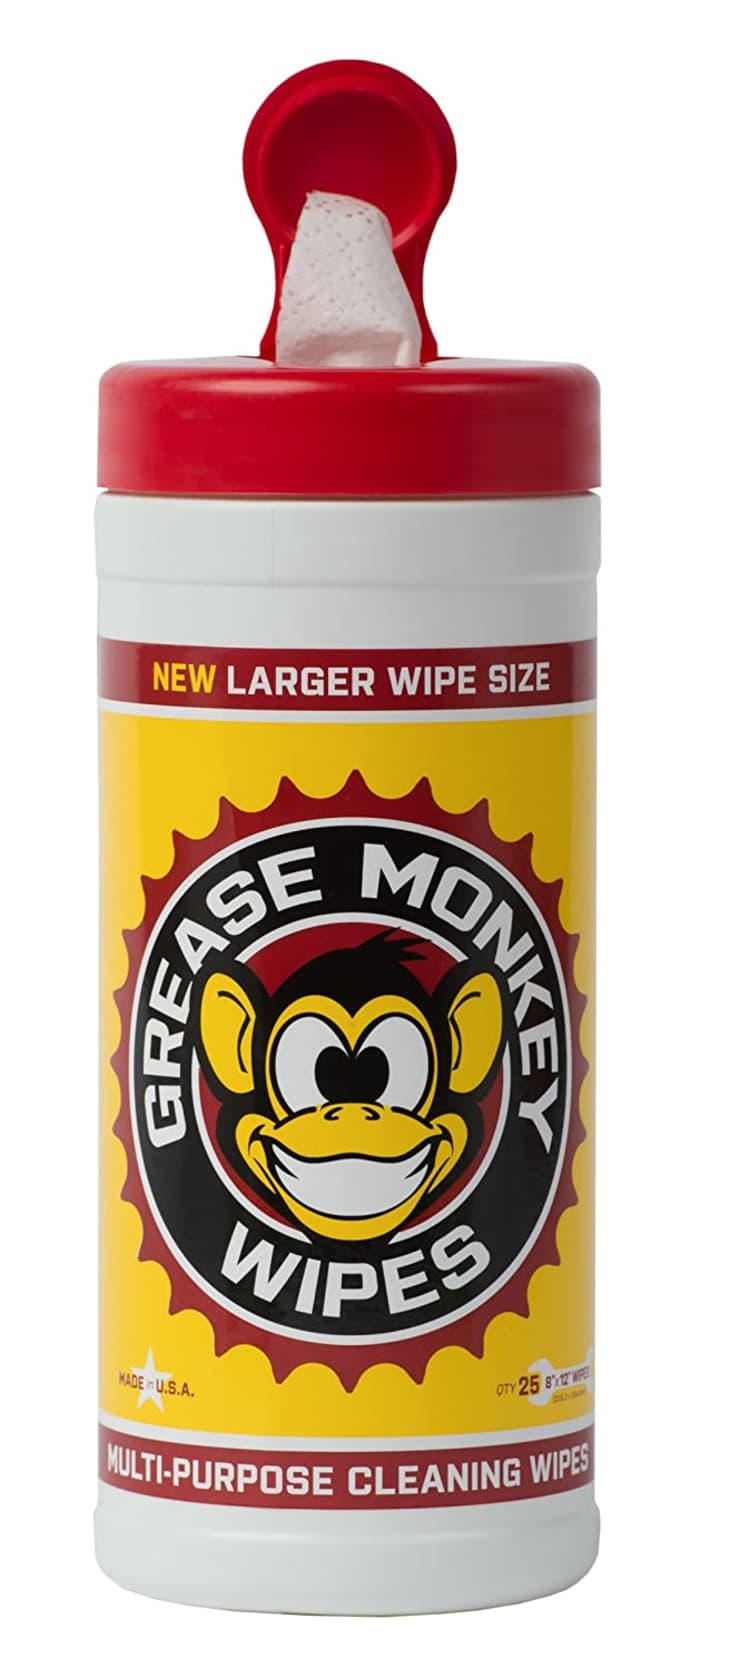 Product Image: Grease Monkey Wipes Canister, 25-Count